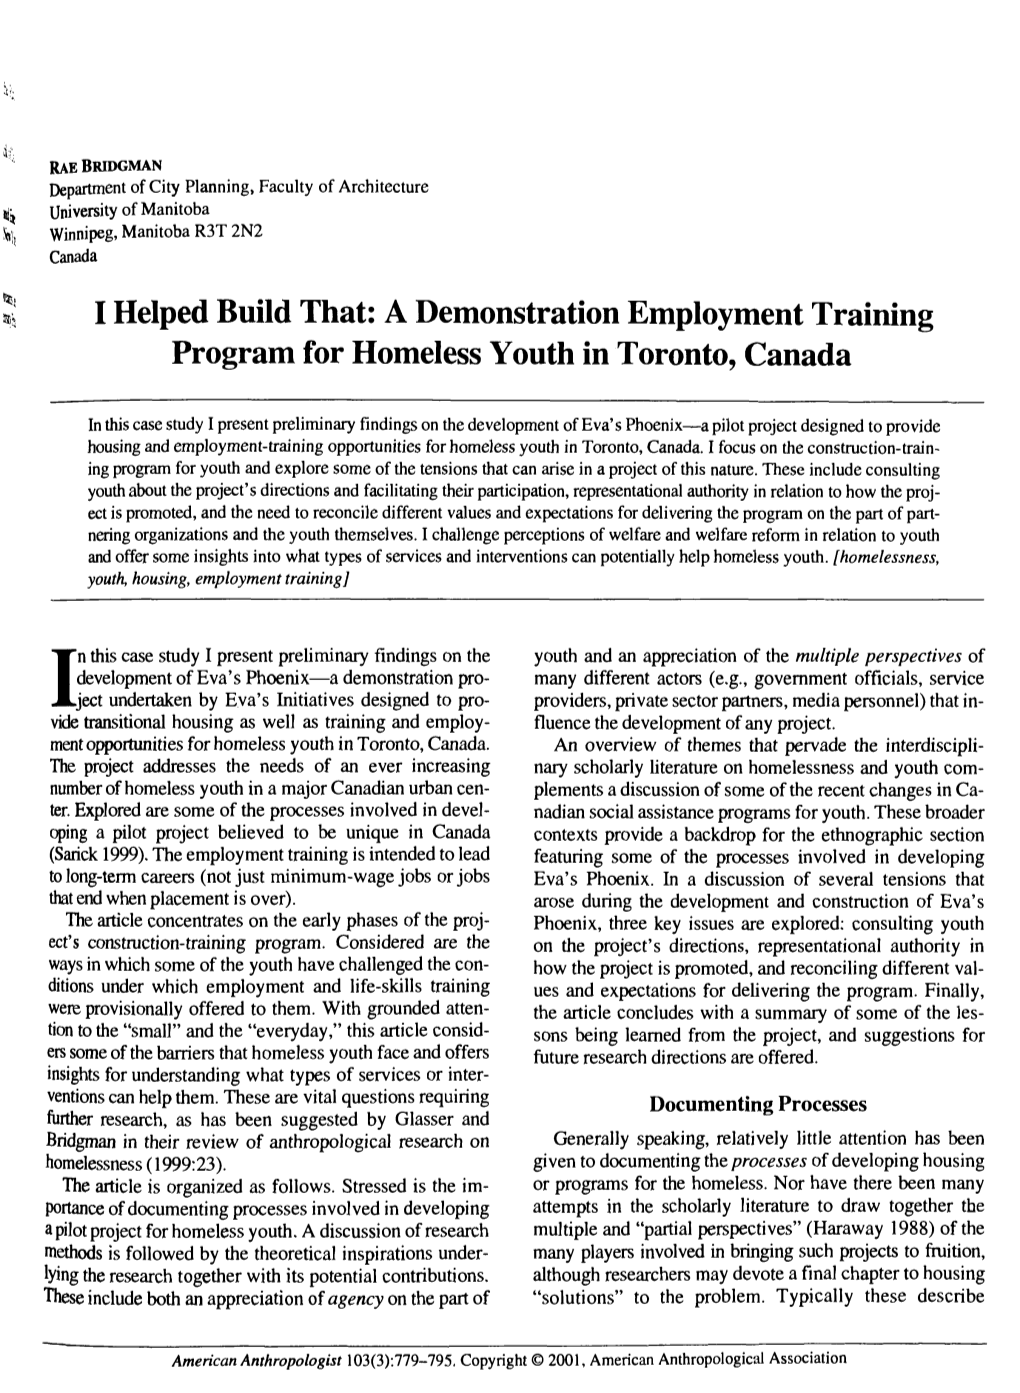 I Helped Build That: a Demonstration Employment Training Program for Homeless Youth in Toronto, Canada